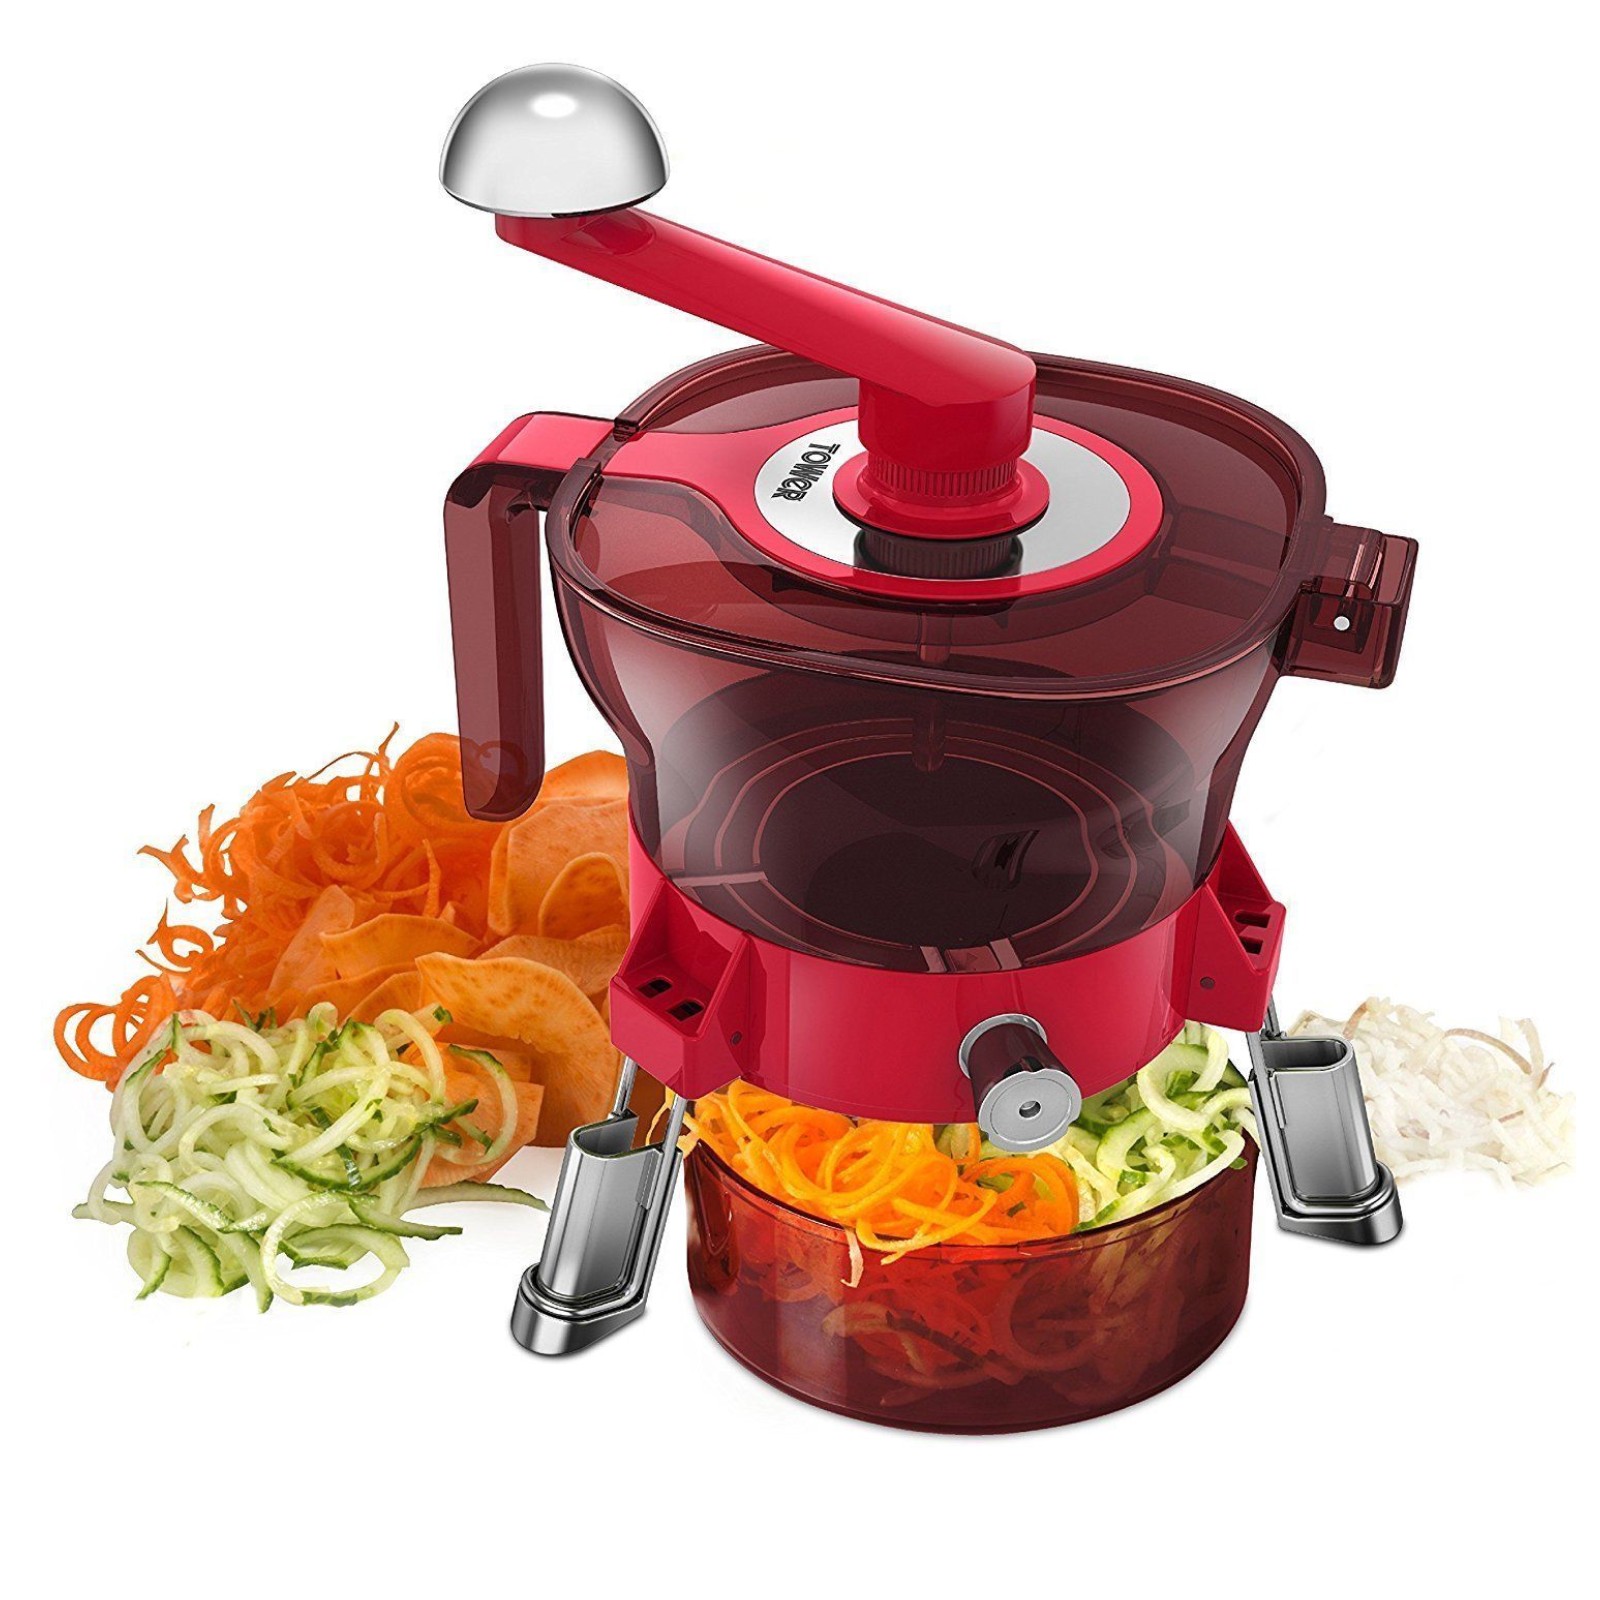 Tower T80429 Limited Edition Spiralizer Ruby - Red - Kettle and Toaster Man